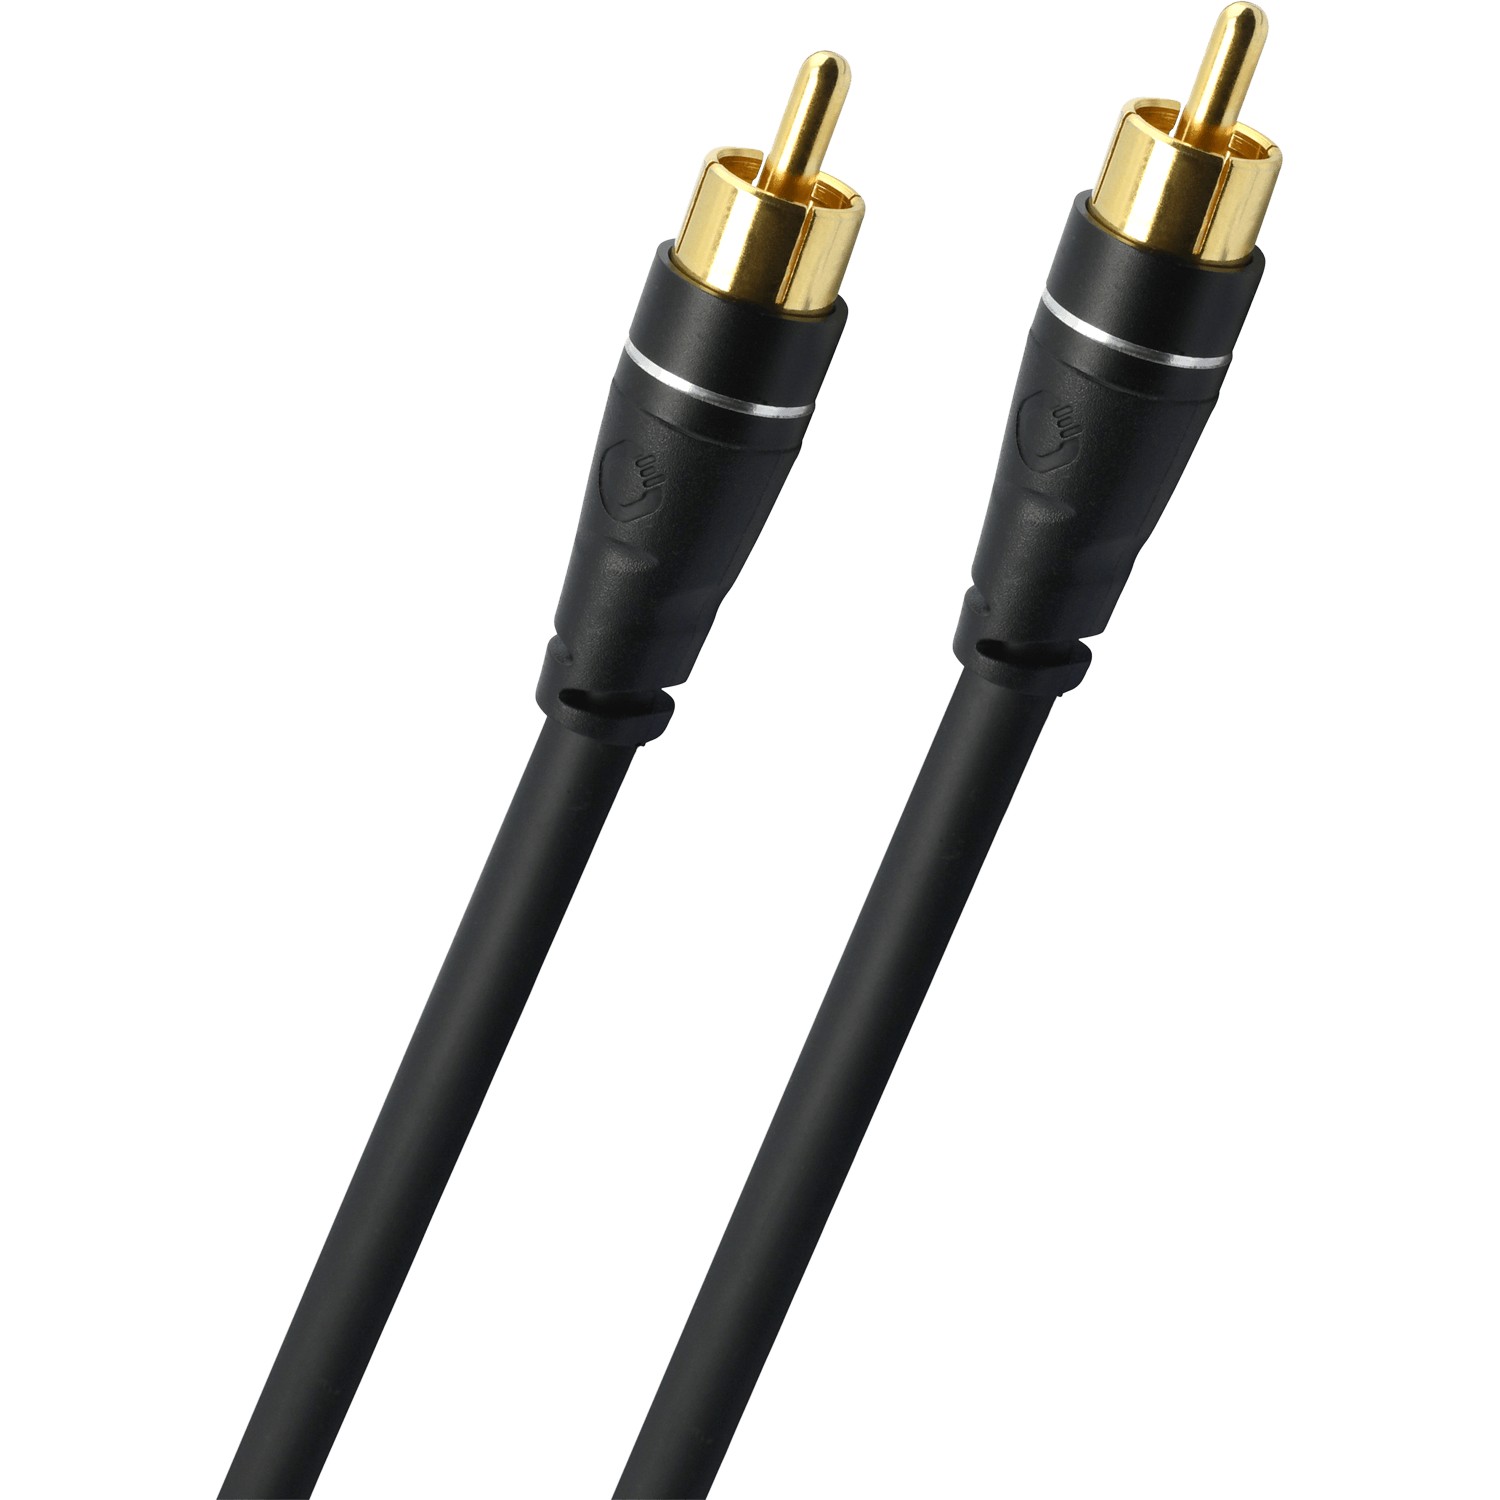 Кабели межблочные аудио Oehlbach EXCELLENCE Sub Link Subwoofer cable 5,0m bw, D1C33162 кабели межблочные аудио oehlbach excellence select opto link toslink cable 3 0m sw d1c33134